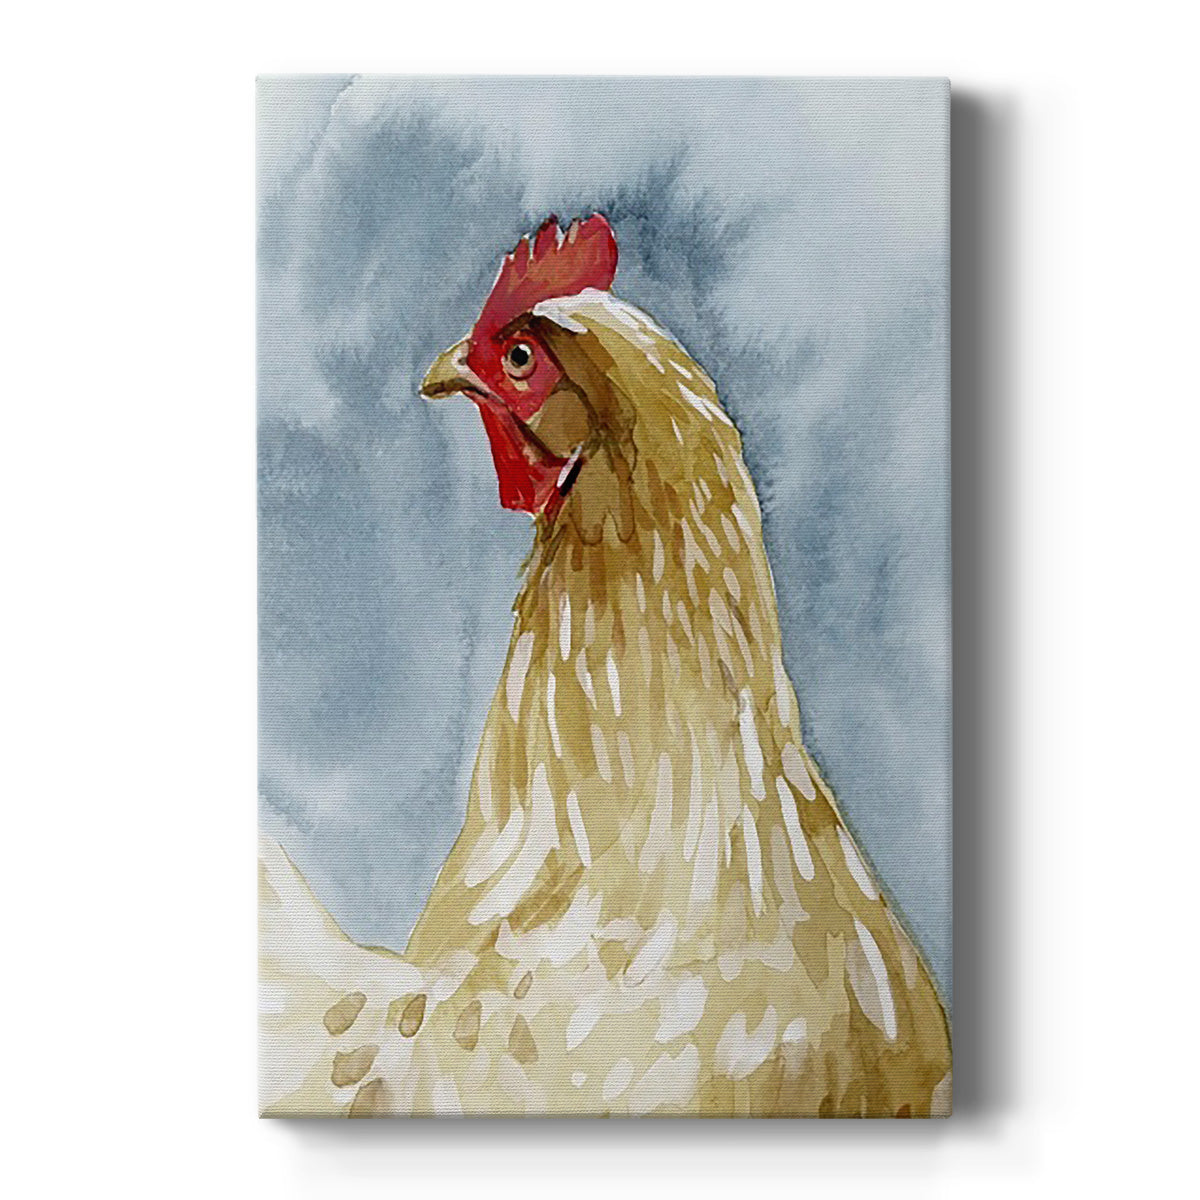 Chicken Portrait I Premium Gallery Wrapped Canvas - Ready to Hang